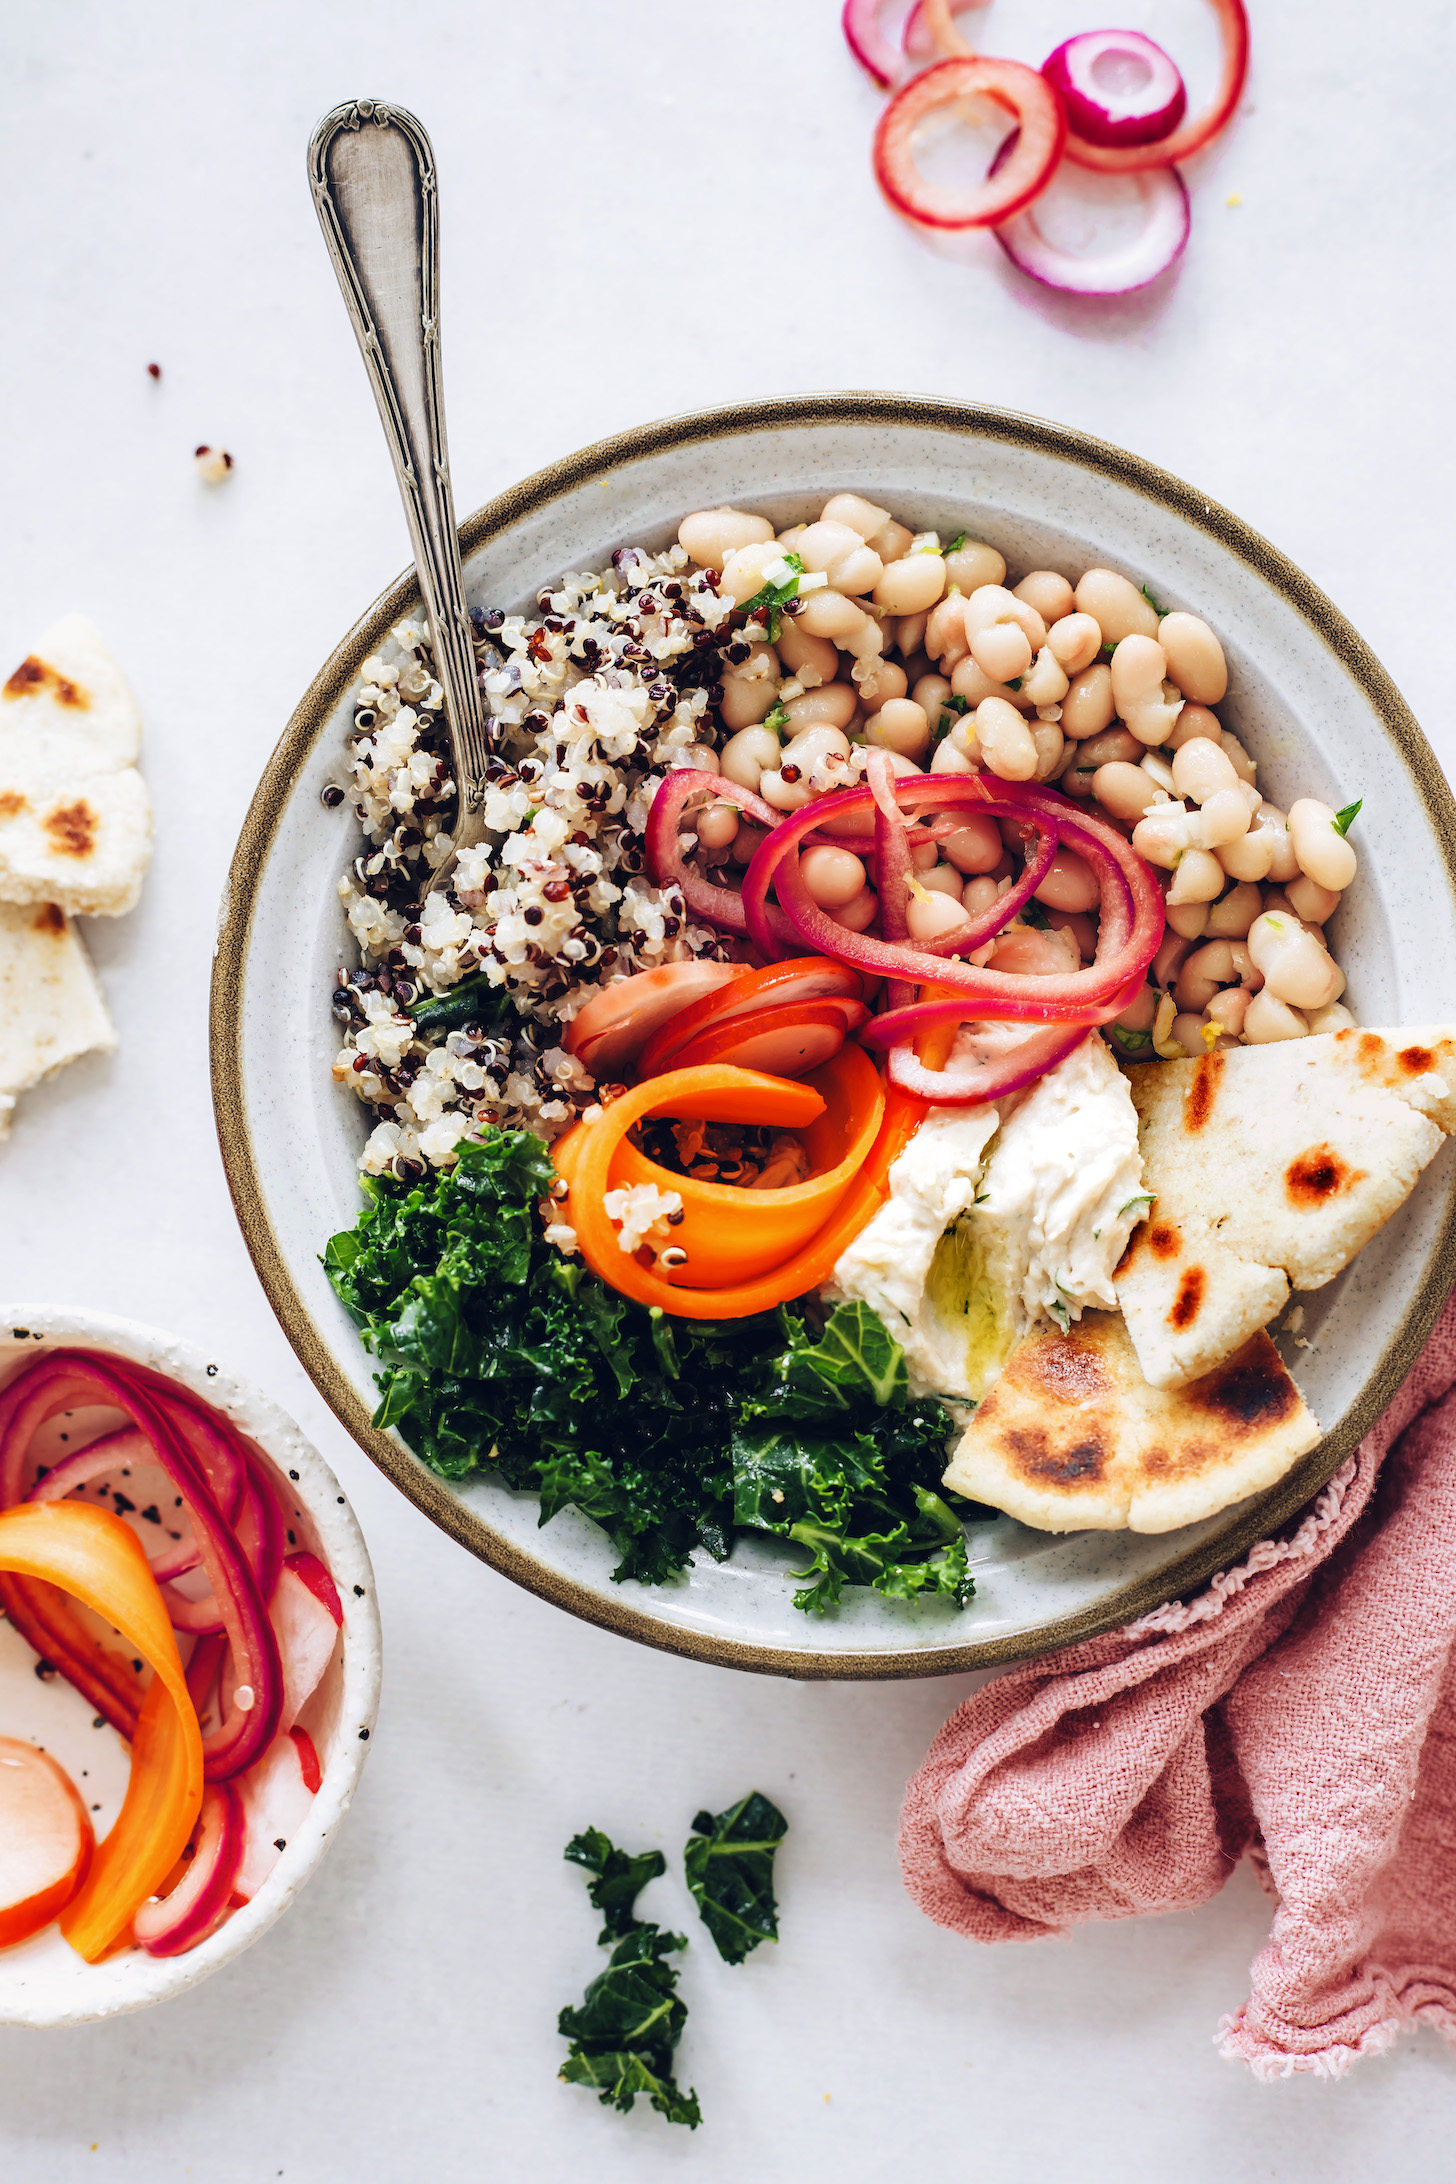 Bowl of cooked quinoa, white beans, GF flatbread, hummus, pickled veggies, and massaged kale